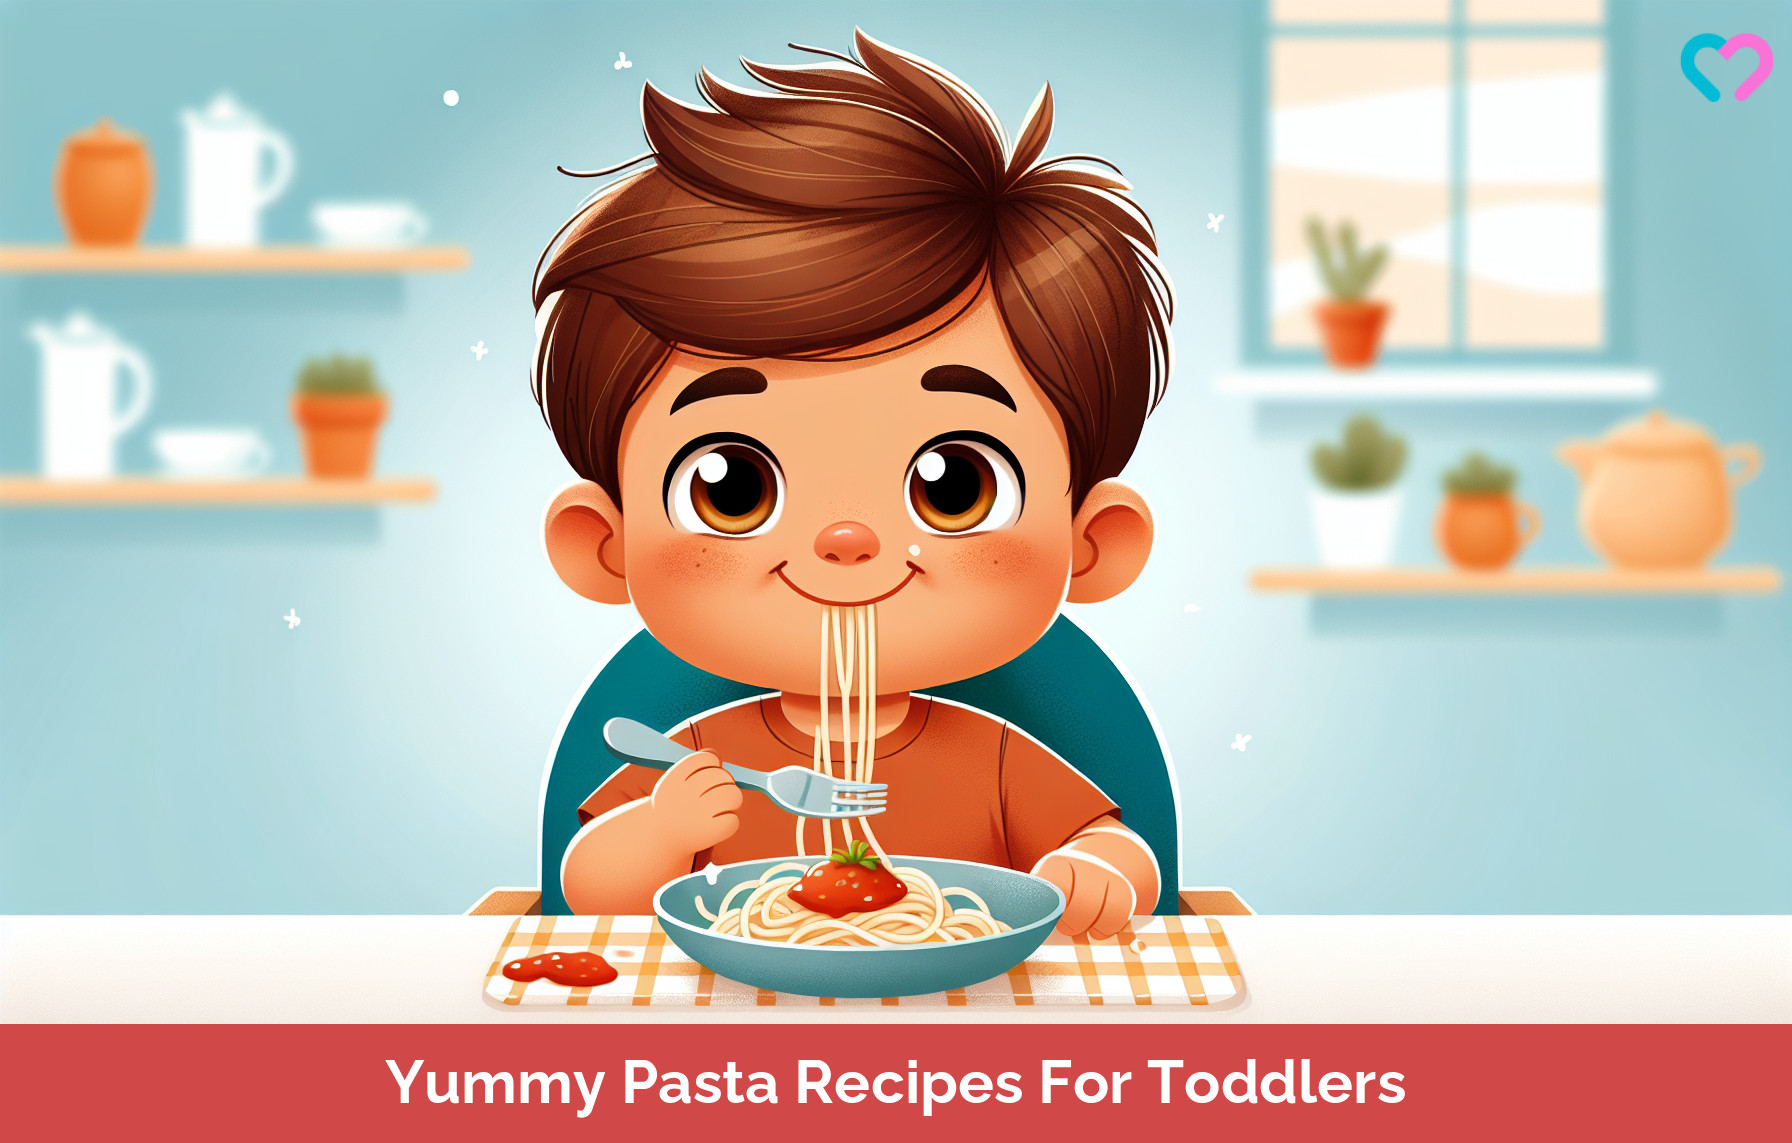 Pasta Recipes For Toddlers_illustration